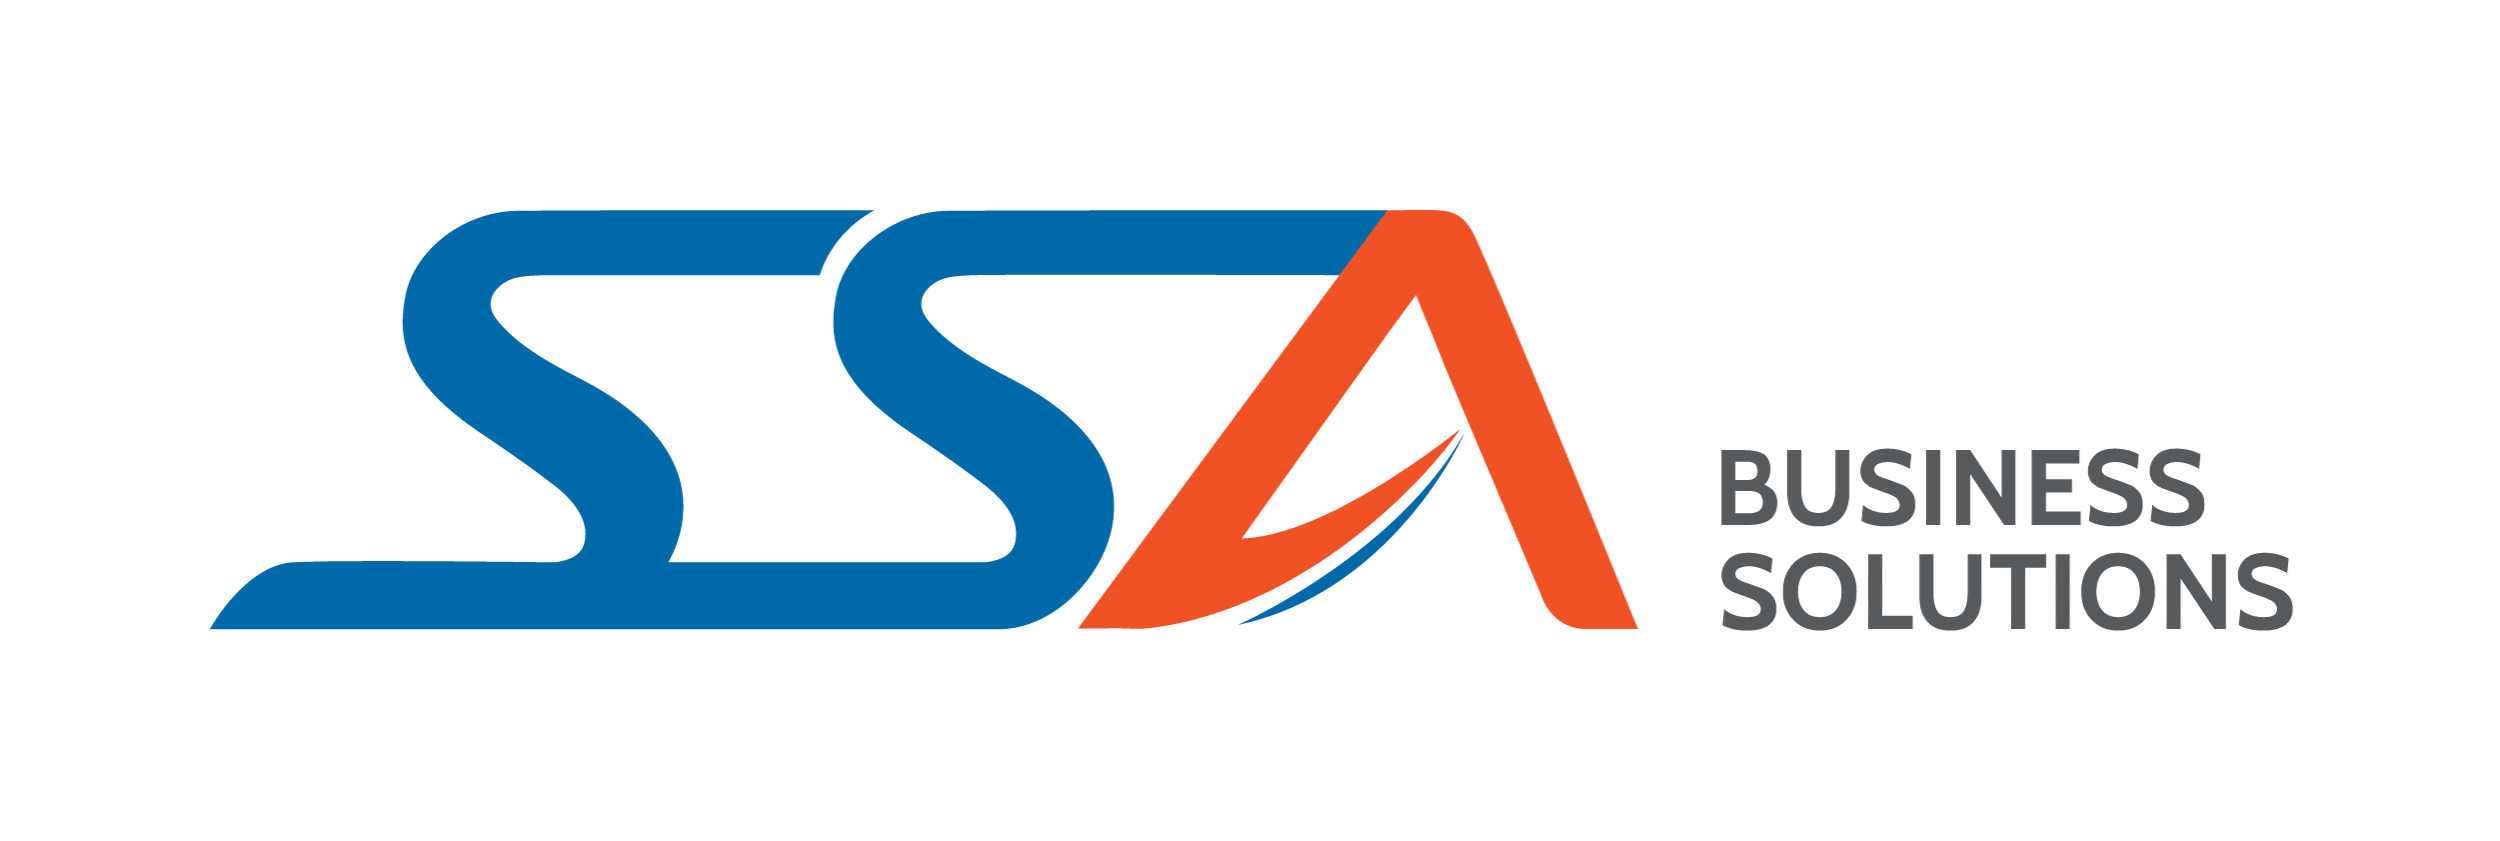 SSA Business Solutions